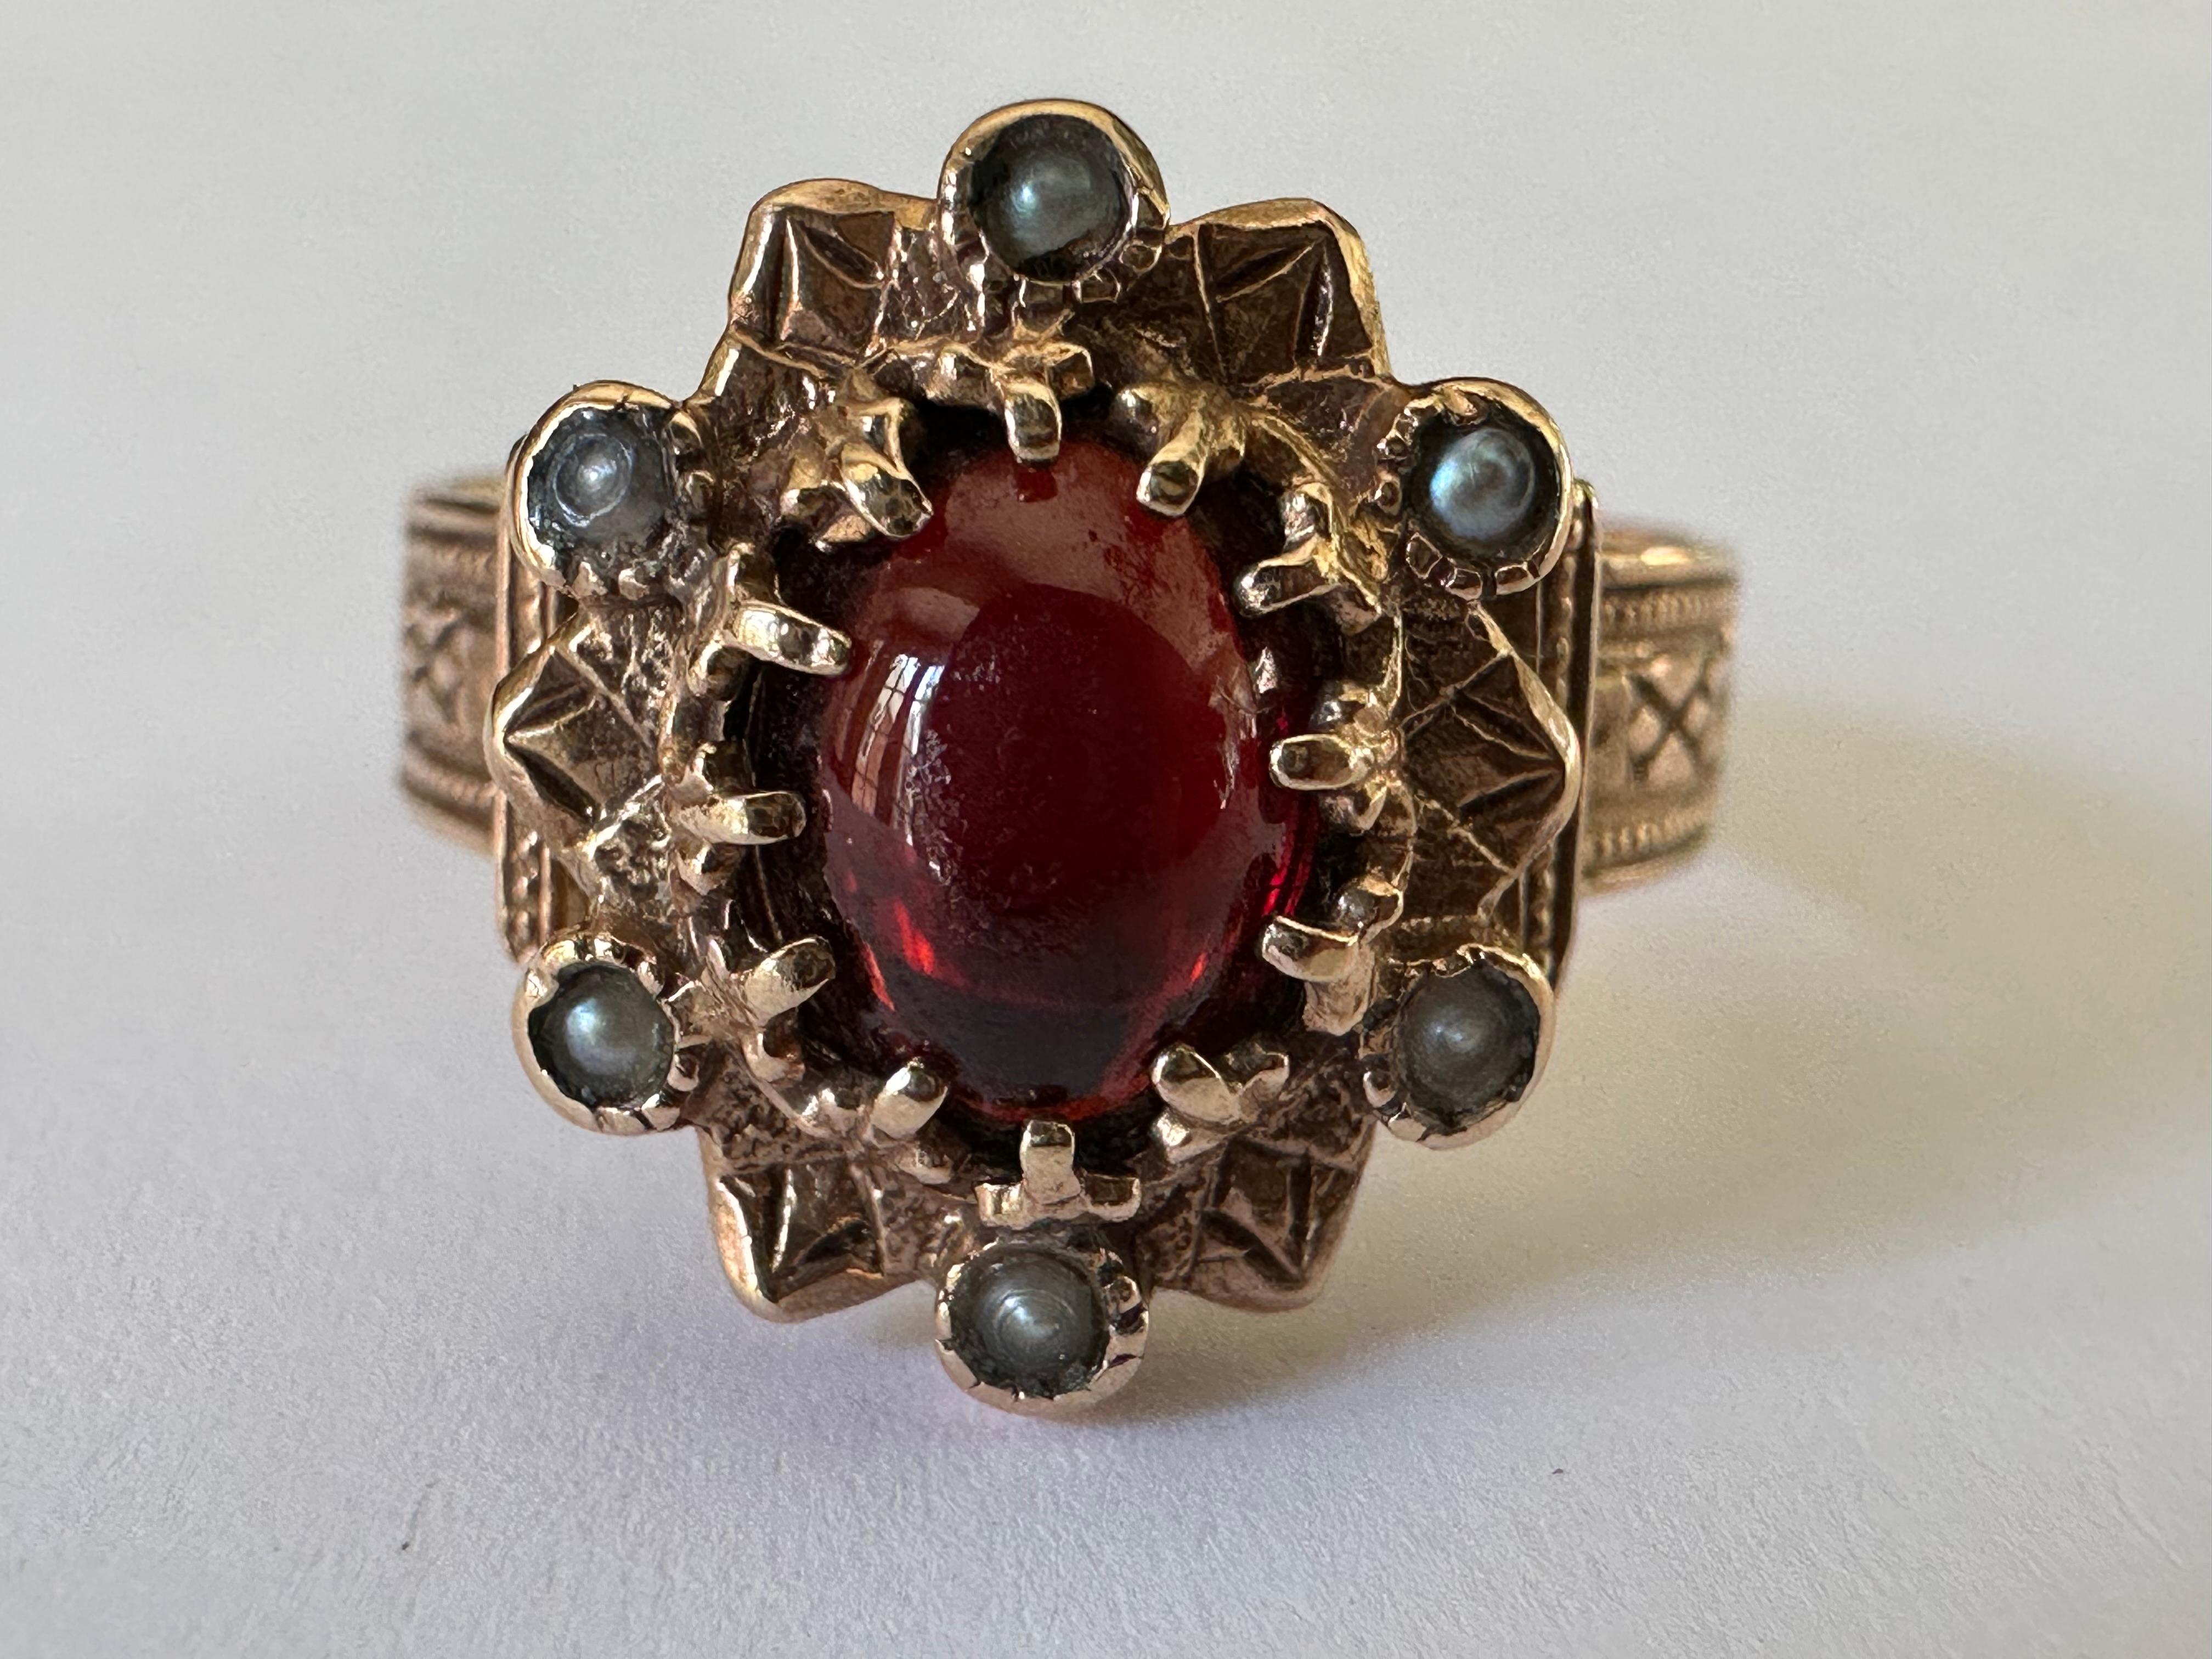 This beautiful antique Victorian ring features a natural oval-shaped cabochon garnet accented by six seed pearls set in an ornate band with fine hand engraving fashioned from 14K yellow gold. The markings on the band indicate the ring was most